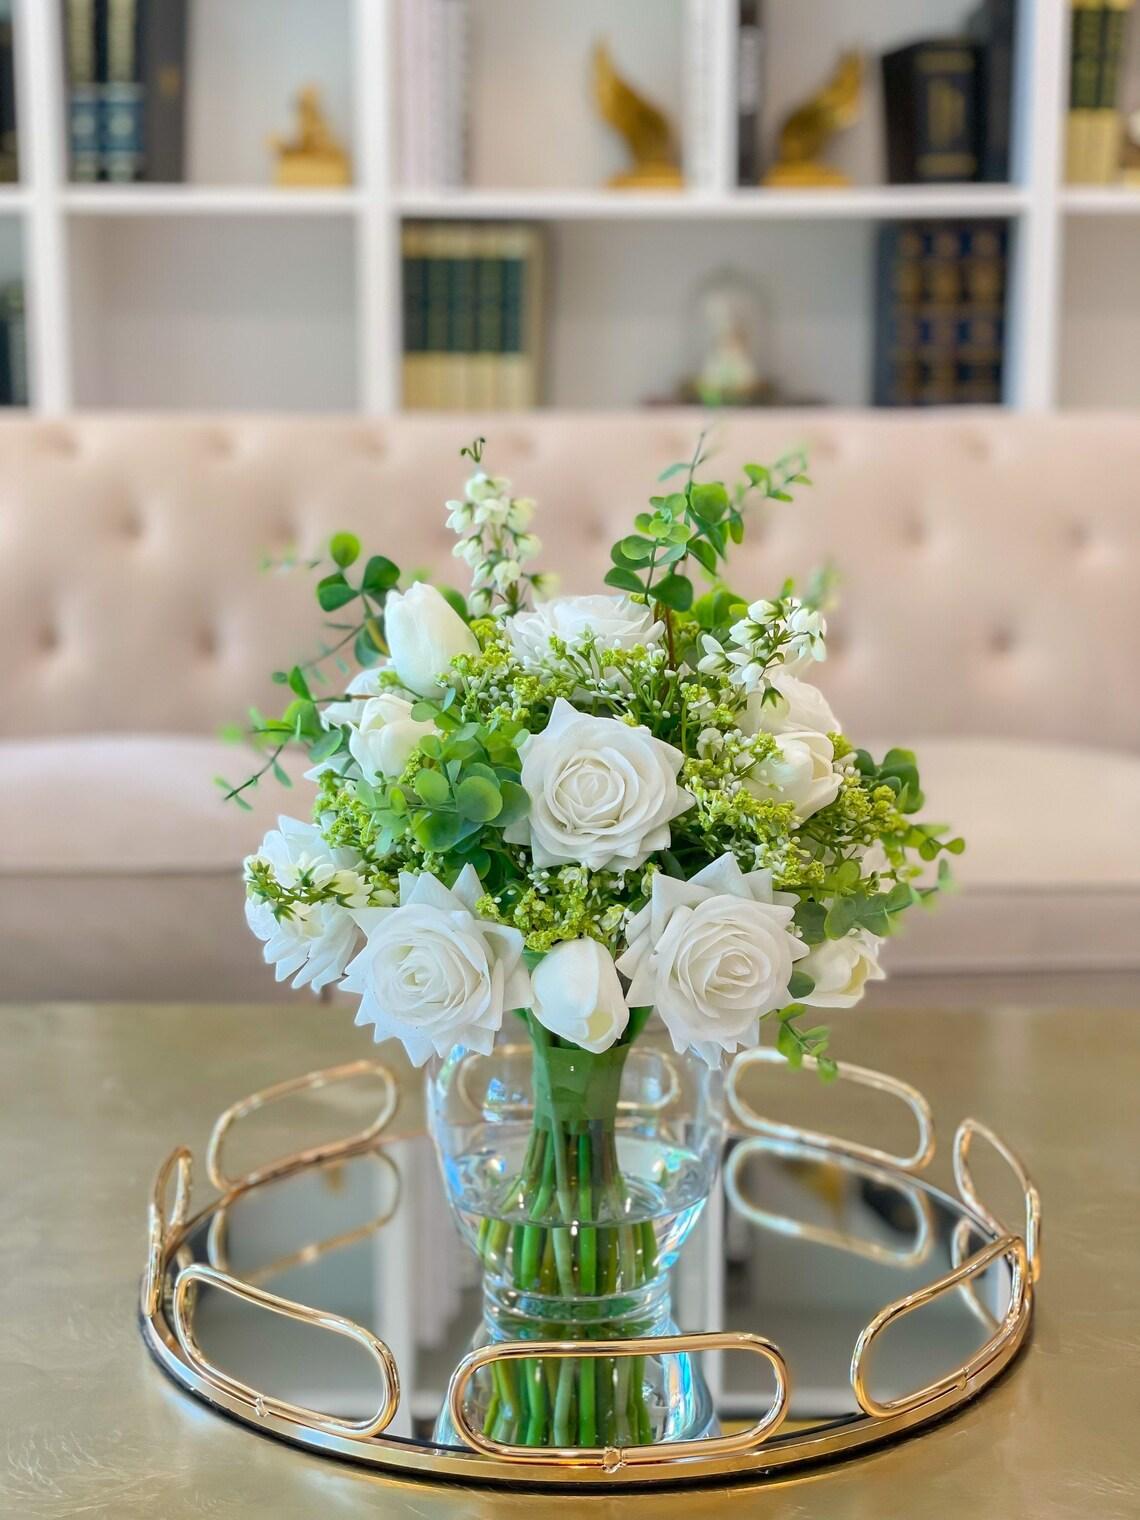 White Real Touch Roses Centerpiece - Flovery